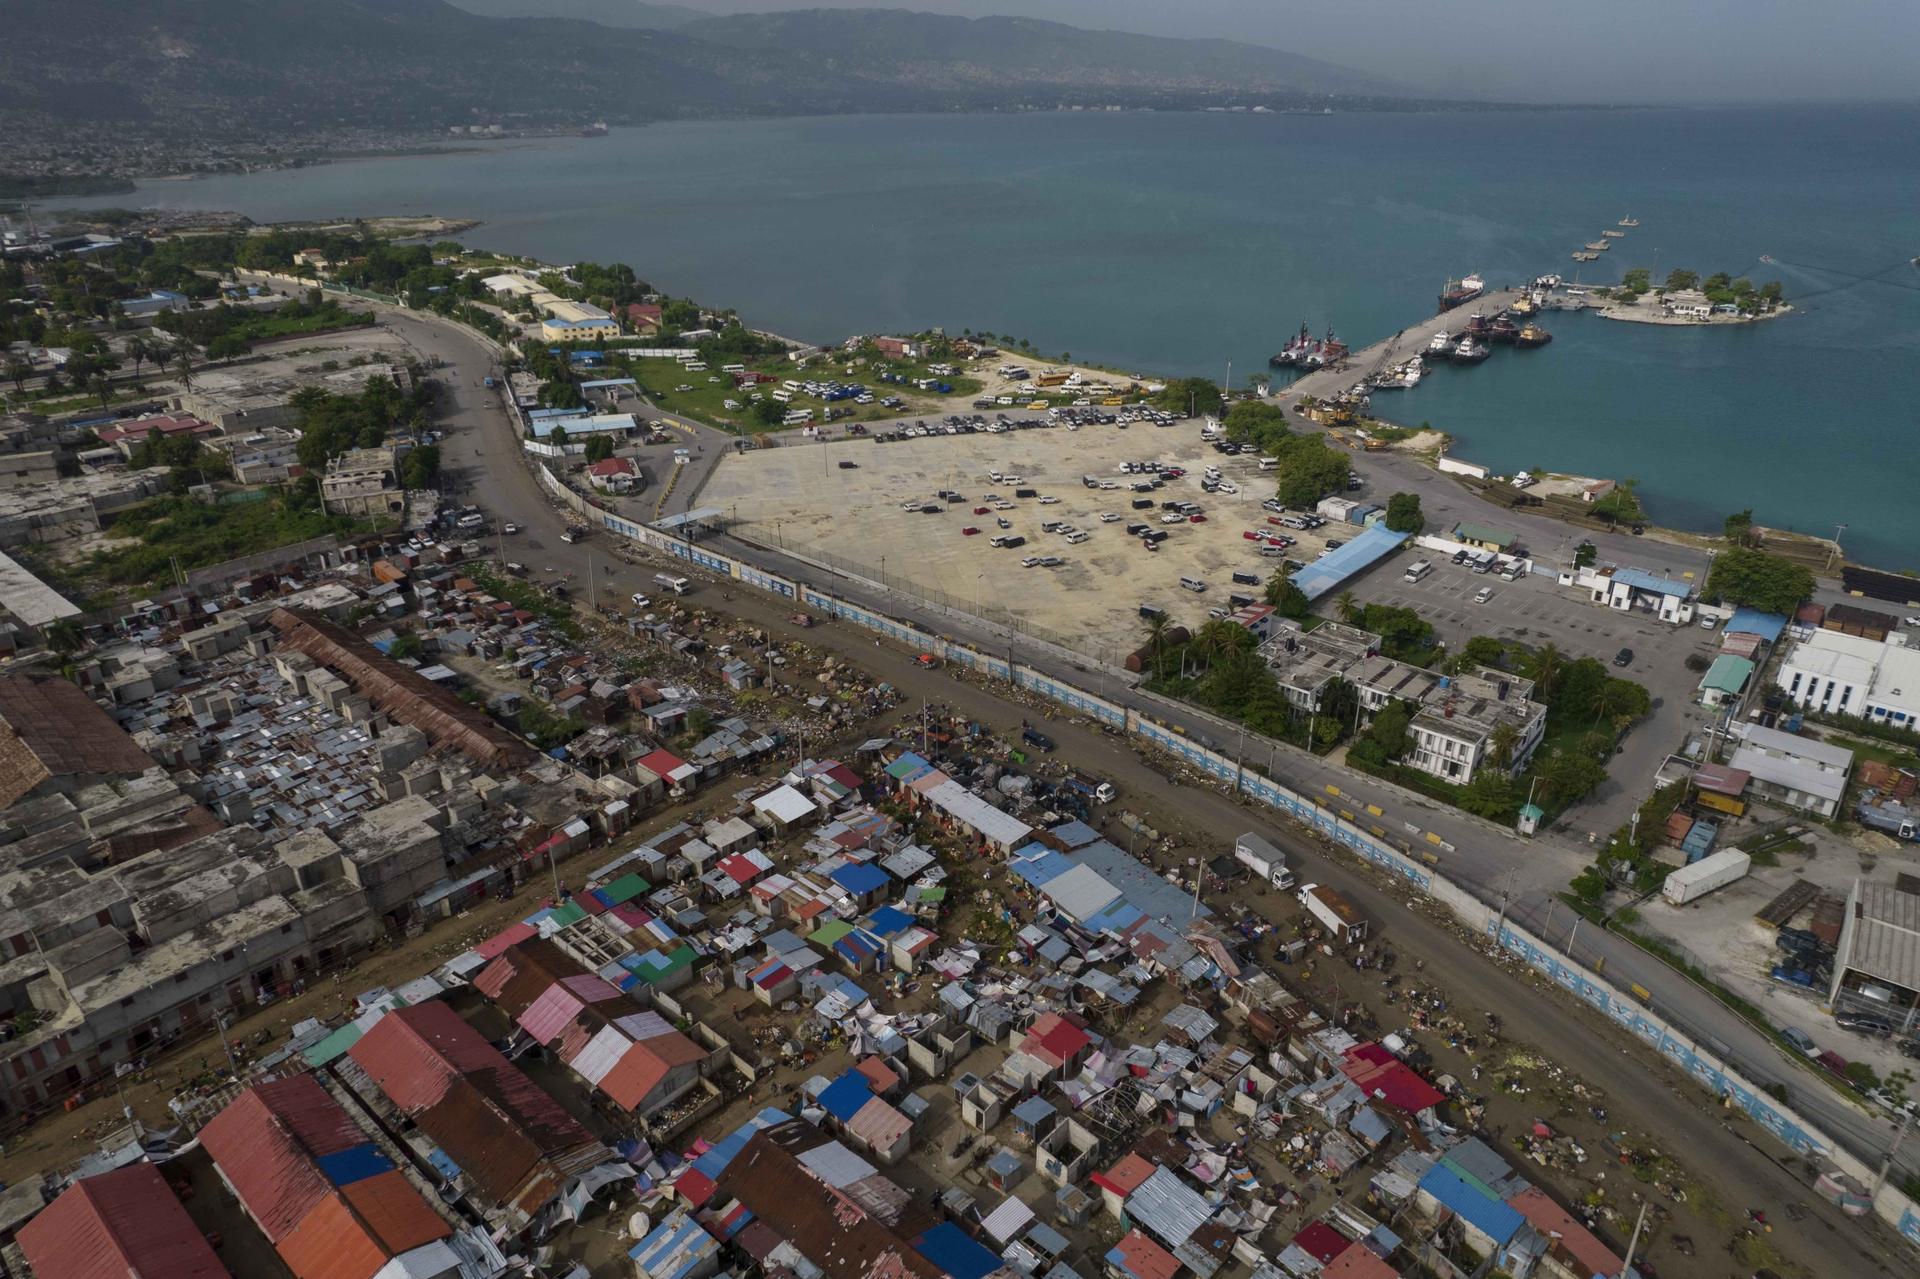 The Croix des Bossales market, translated from Creole to the Slaves Market, a gang-controlled area, is located in the port district of La Saline in Port-au-Prince, Haiti, on Oct. 4, 2021. Gangs control up to 40% of Port-au-Prince, a city of more than 2.8 